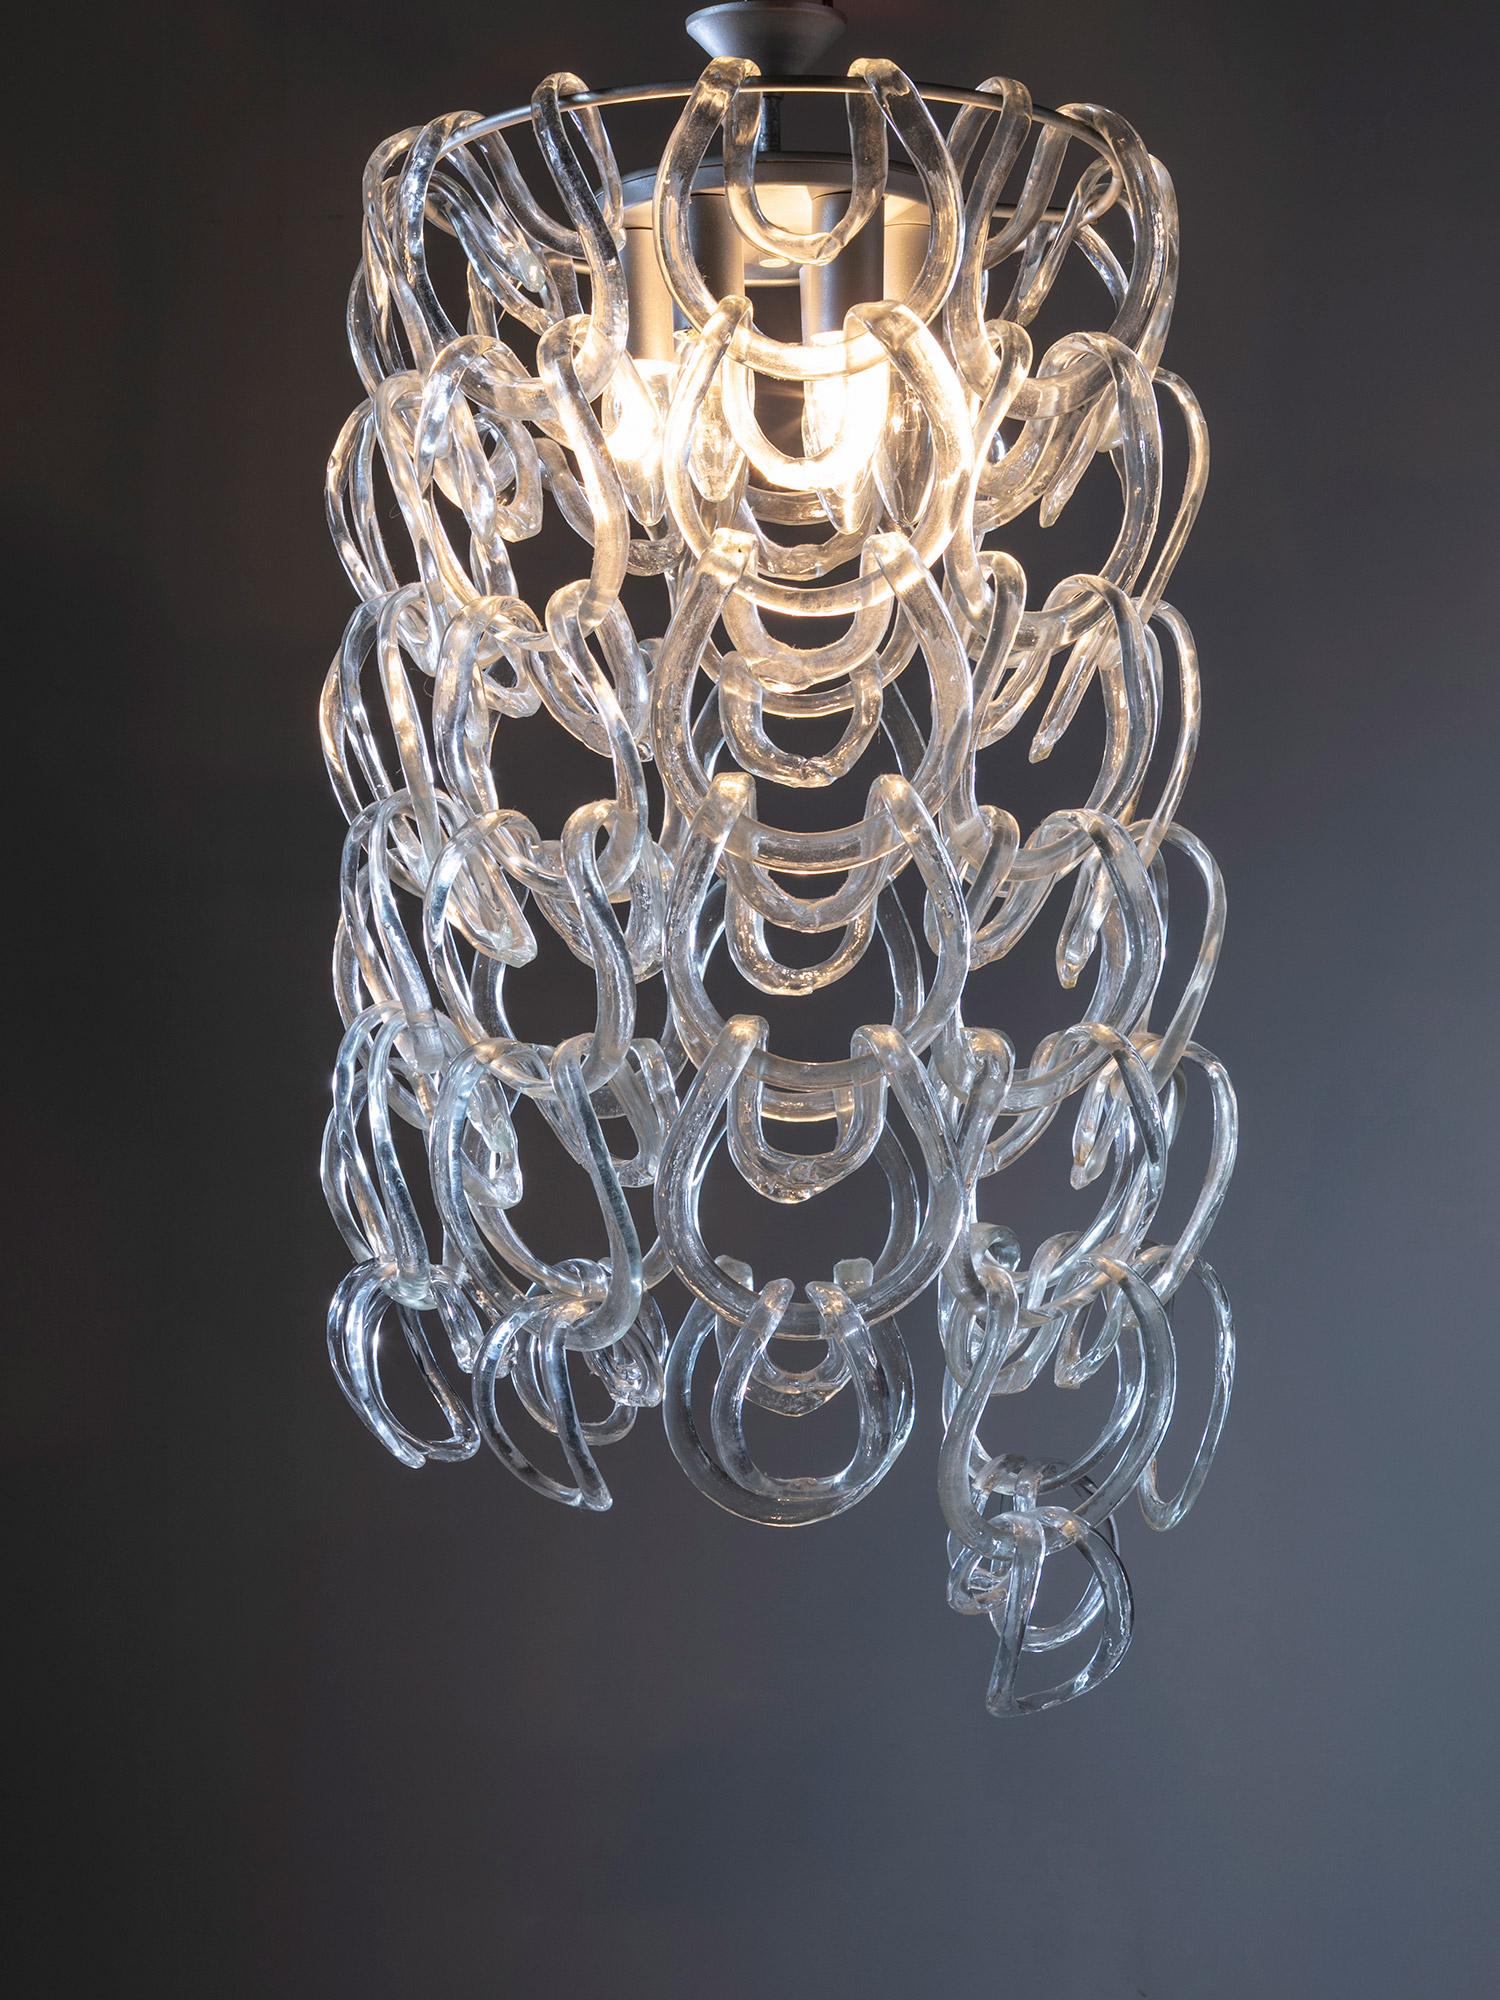 Giogali chandelier by Angelo Mangiarotti for Vistosi, Murano.
Metal round frame allows to connect the glass ribbons creating a shiny glass fall. 